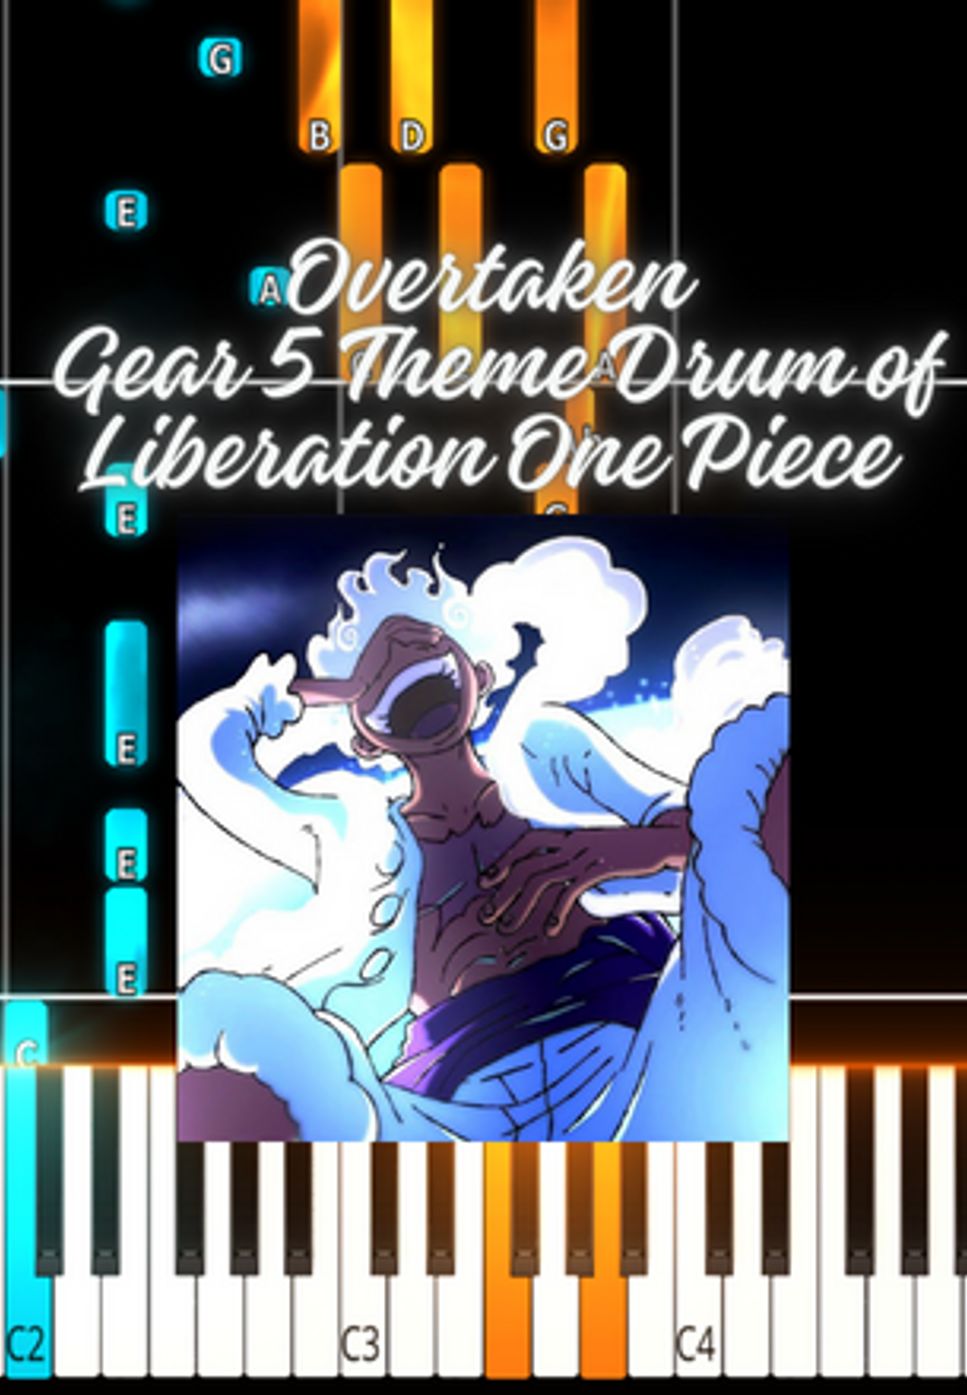 Kohei Tanaka - Overtaken Gear 5 Theme Drum of Liberation by Marco D.